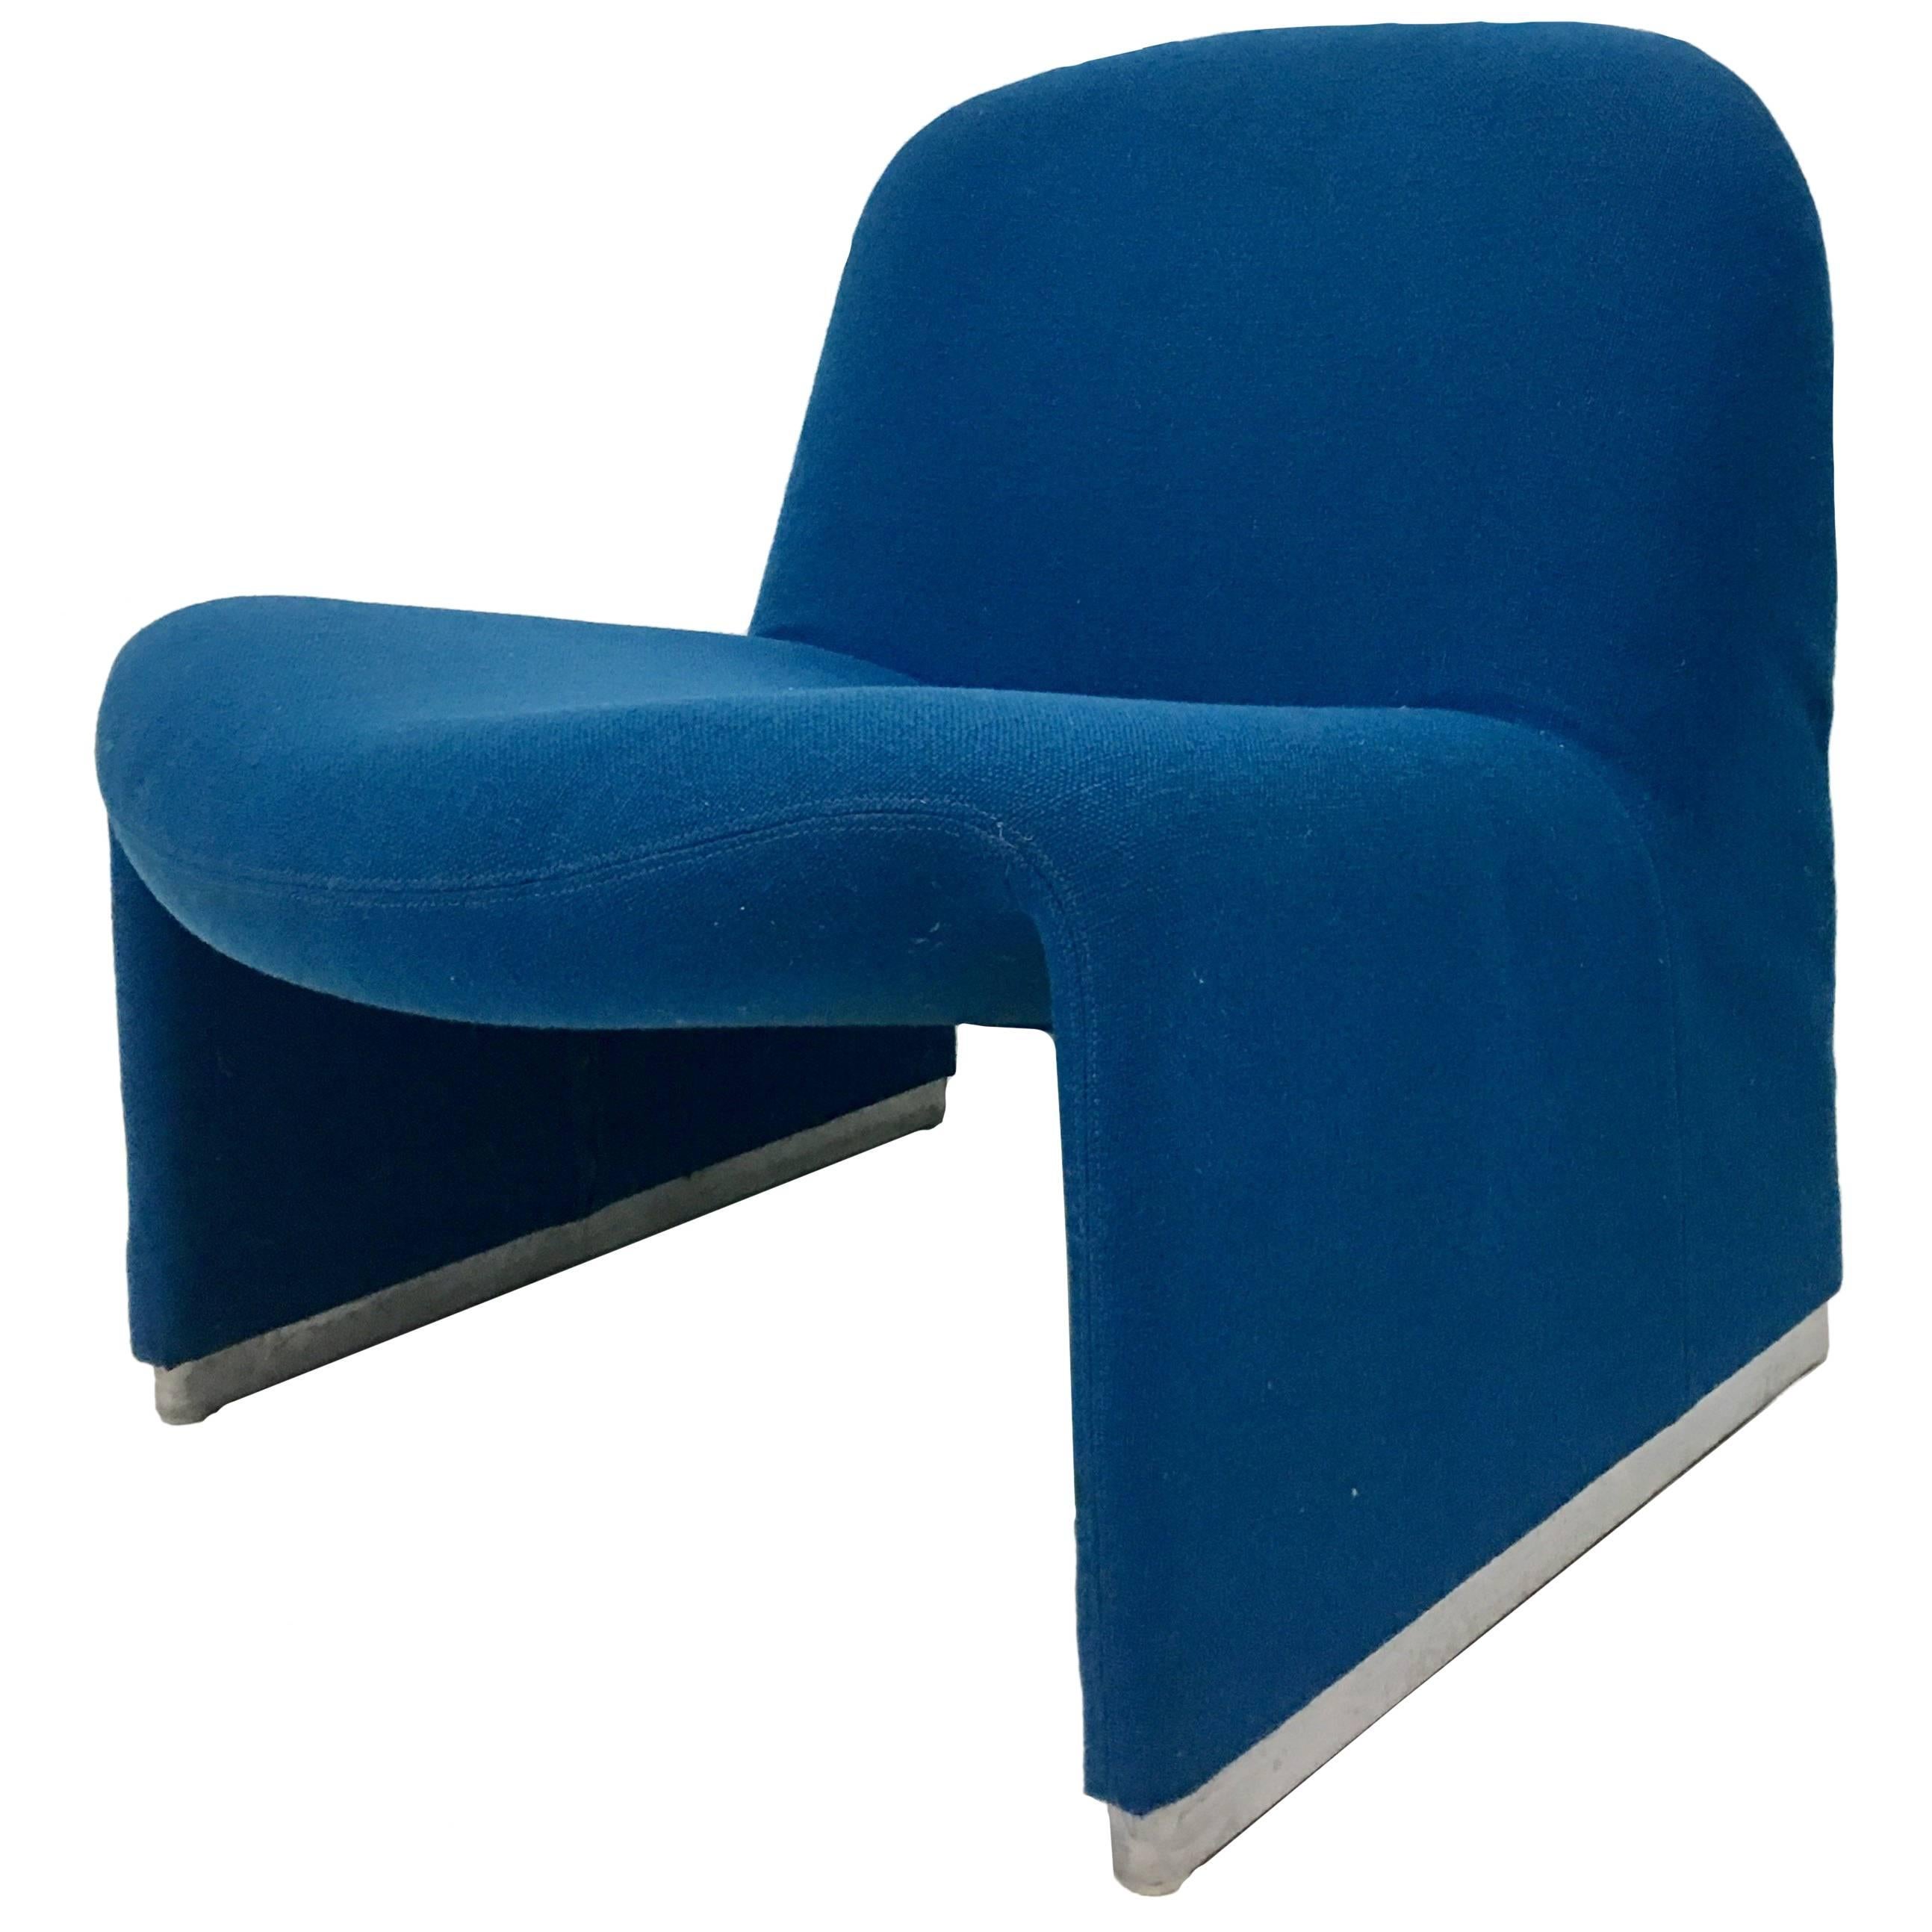 "Alky" Chair by Giancarlo Piretti for Castelli, 1970, Italy